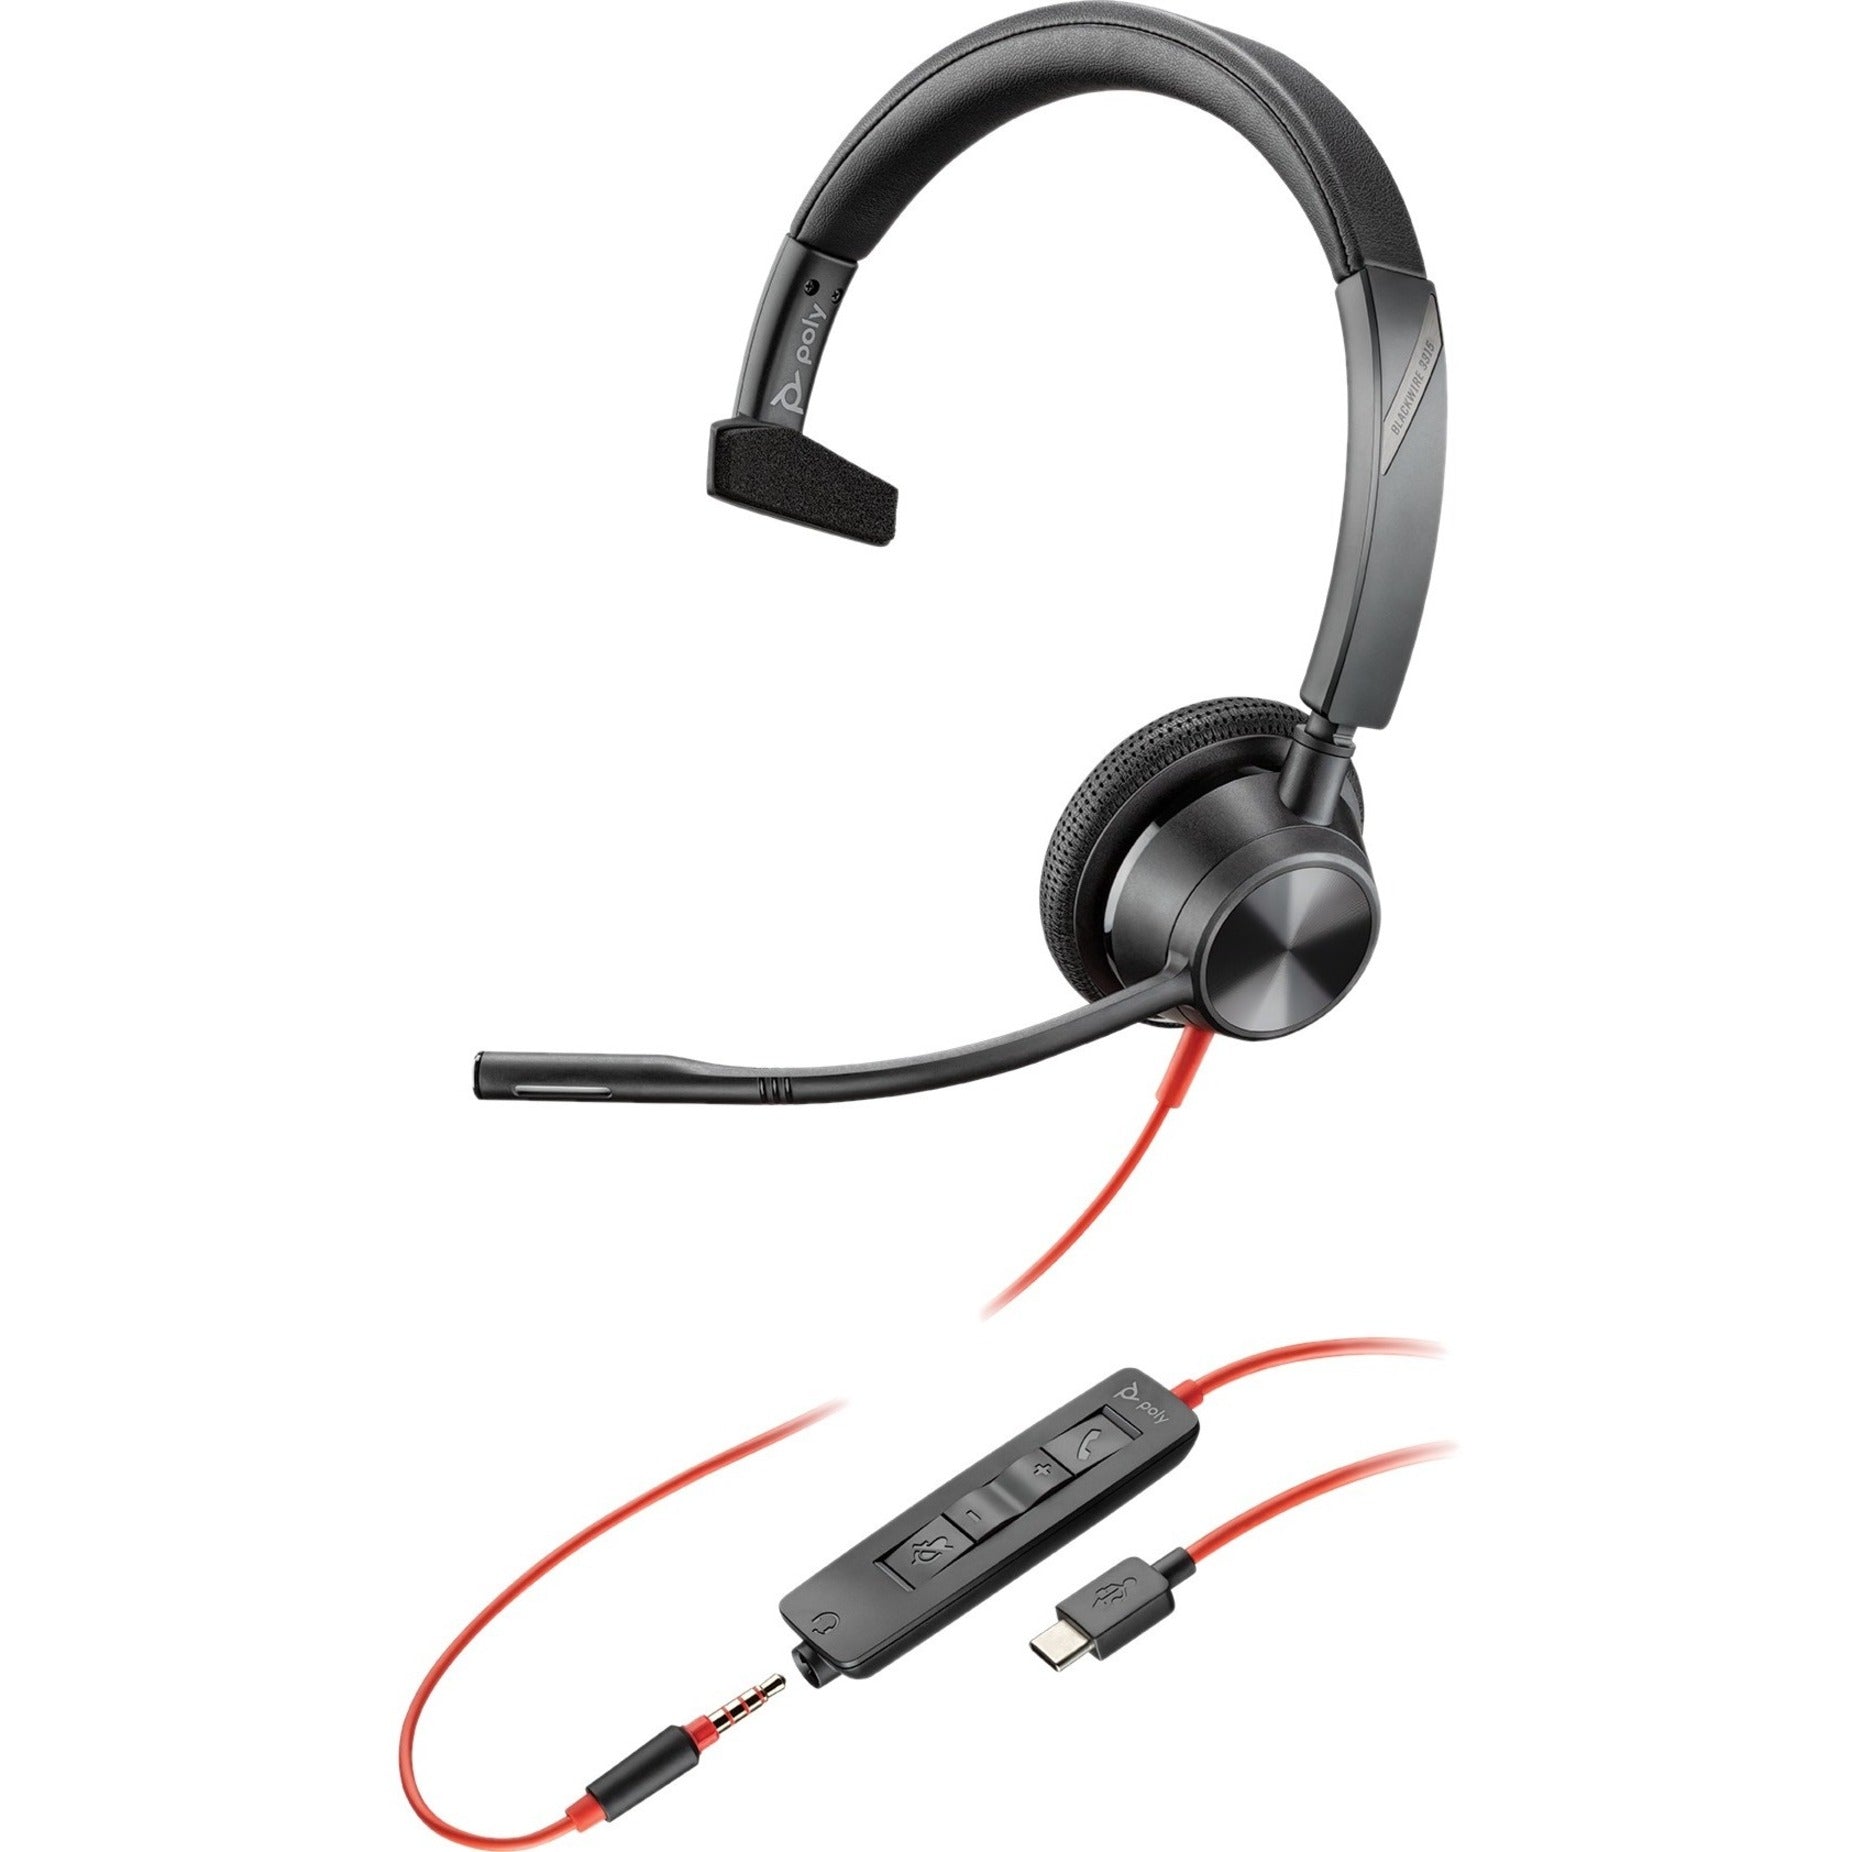 Poly 214015-101 Blackwire 3315 Headset, Over-the-head USB Type C and 3.5mm Wired Headset with Adjustable Headband